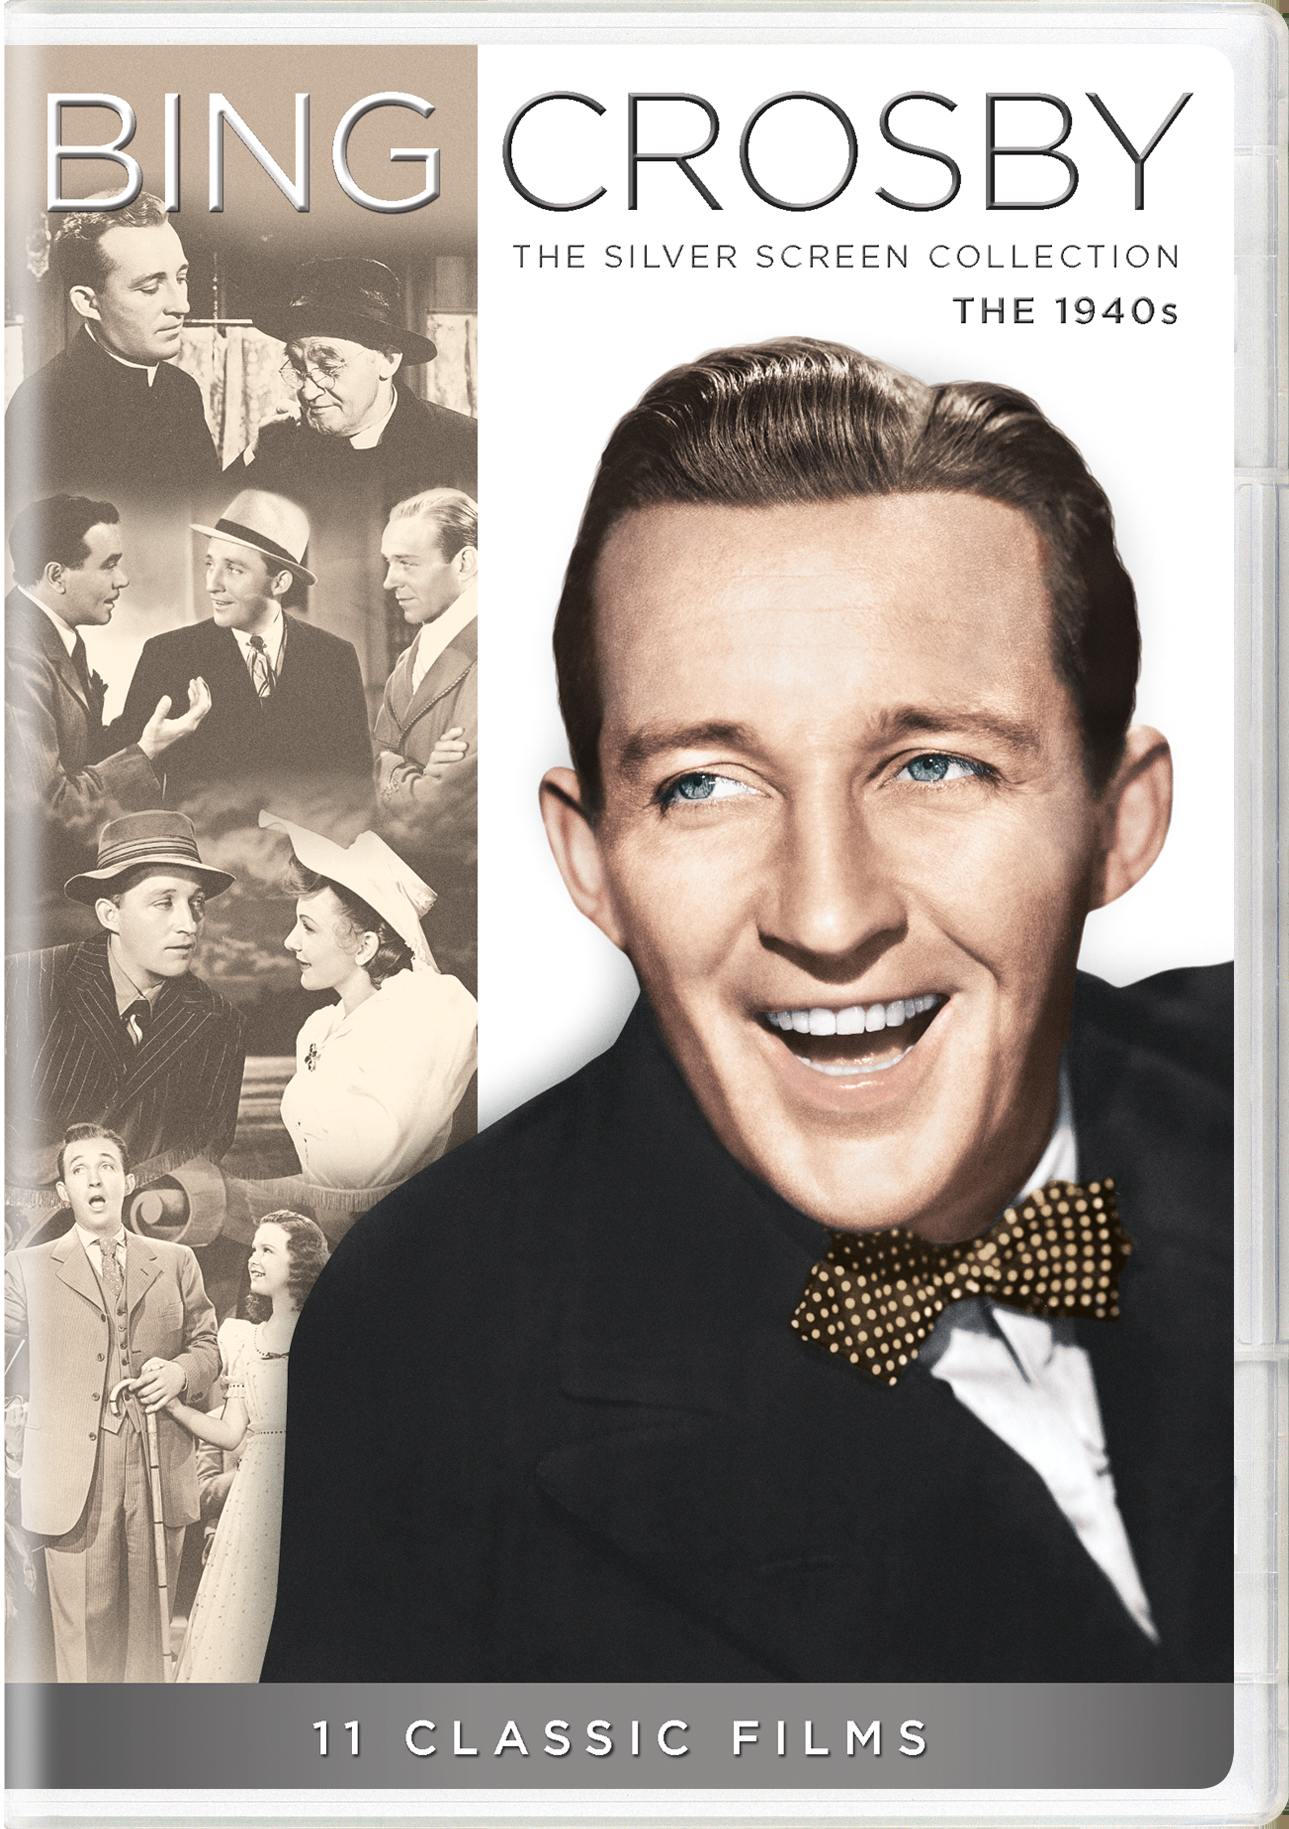 Bing Crosby: The Silver Screen Collection - The 1940s (Box Set) - DVD [ ] - Musical Movies on DVD